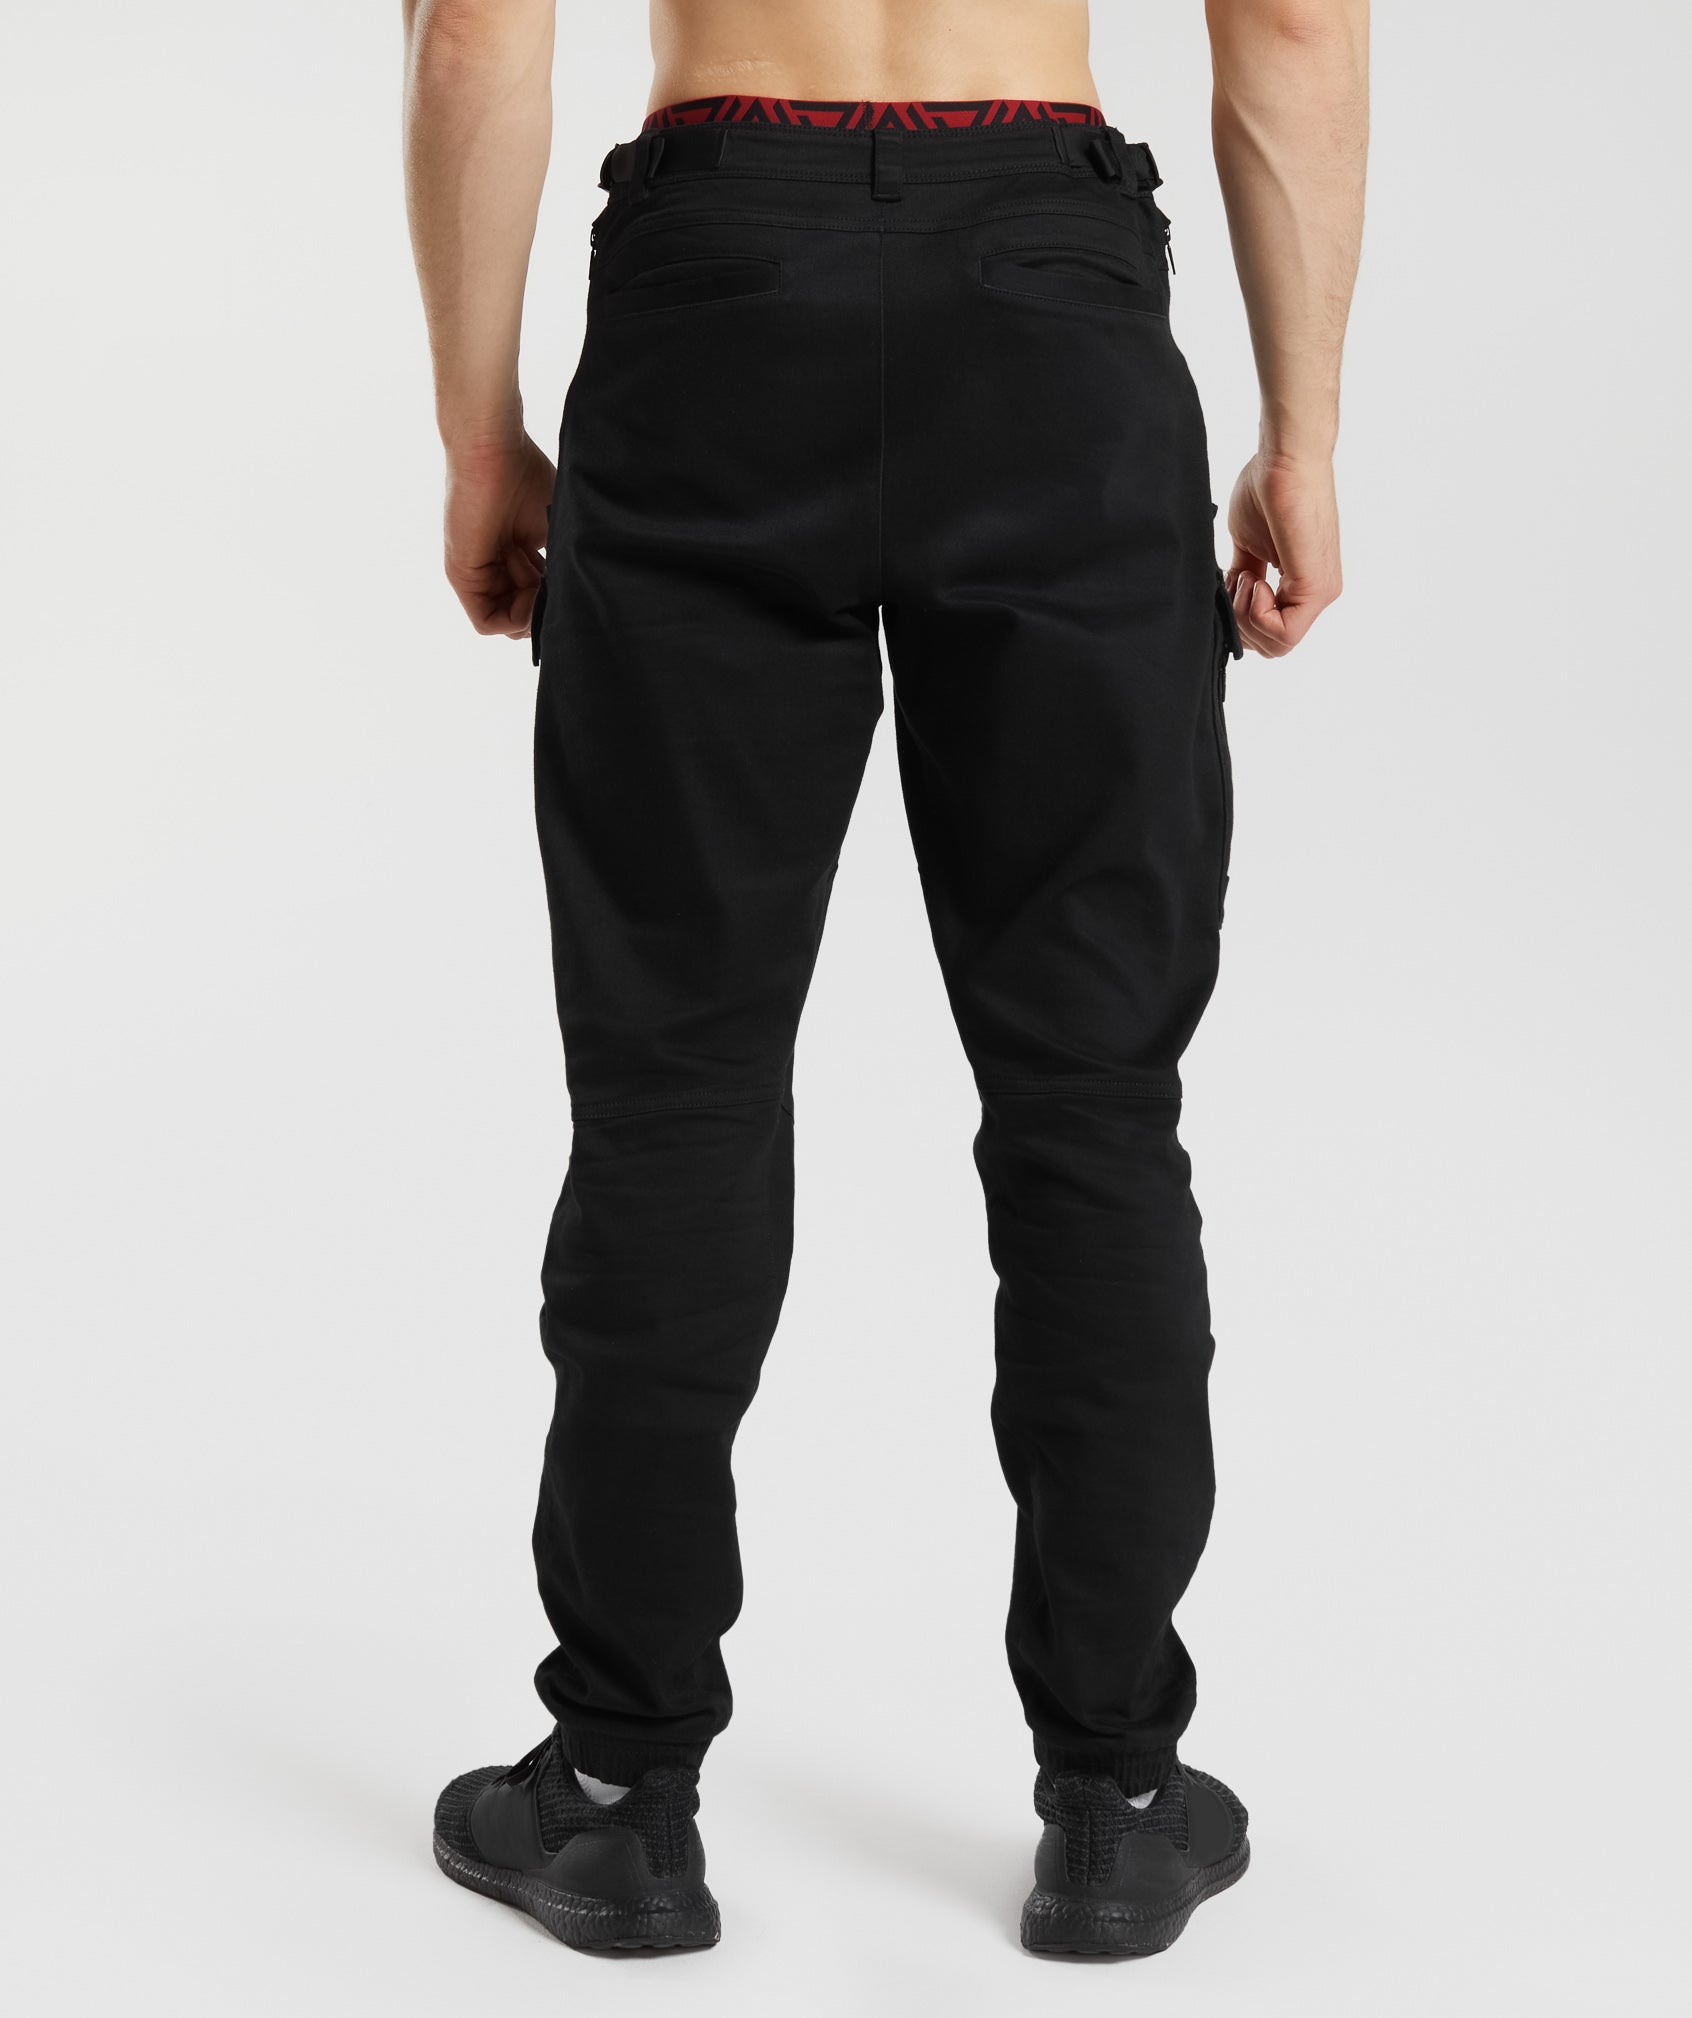 GS x David Laid Cargo Pants in Black - view 2